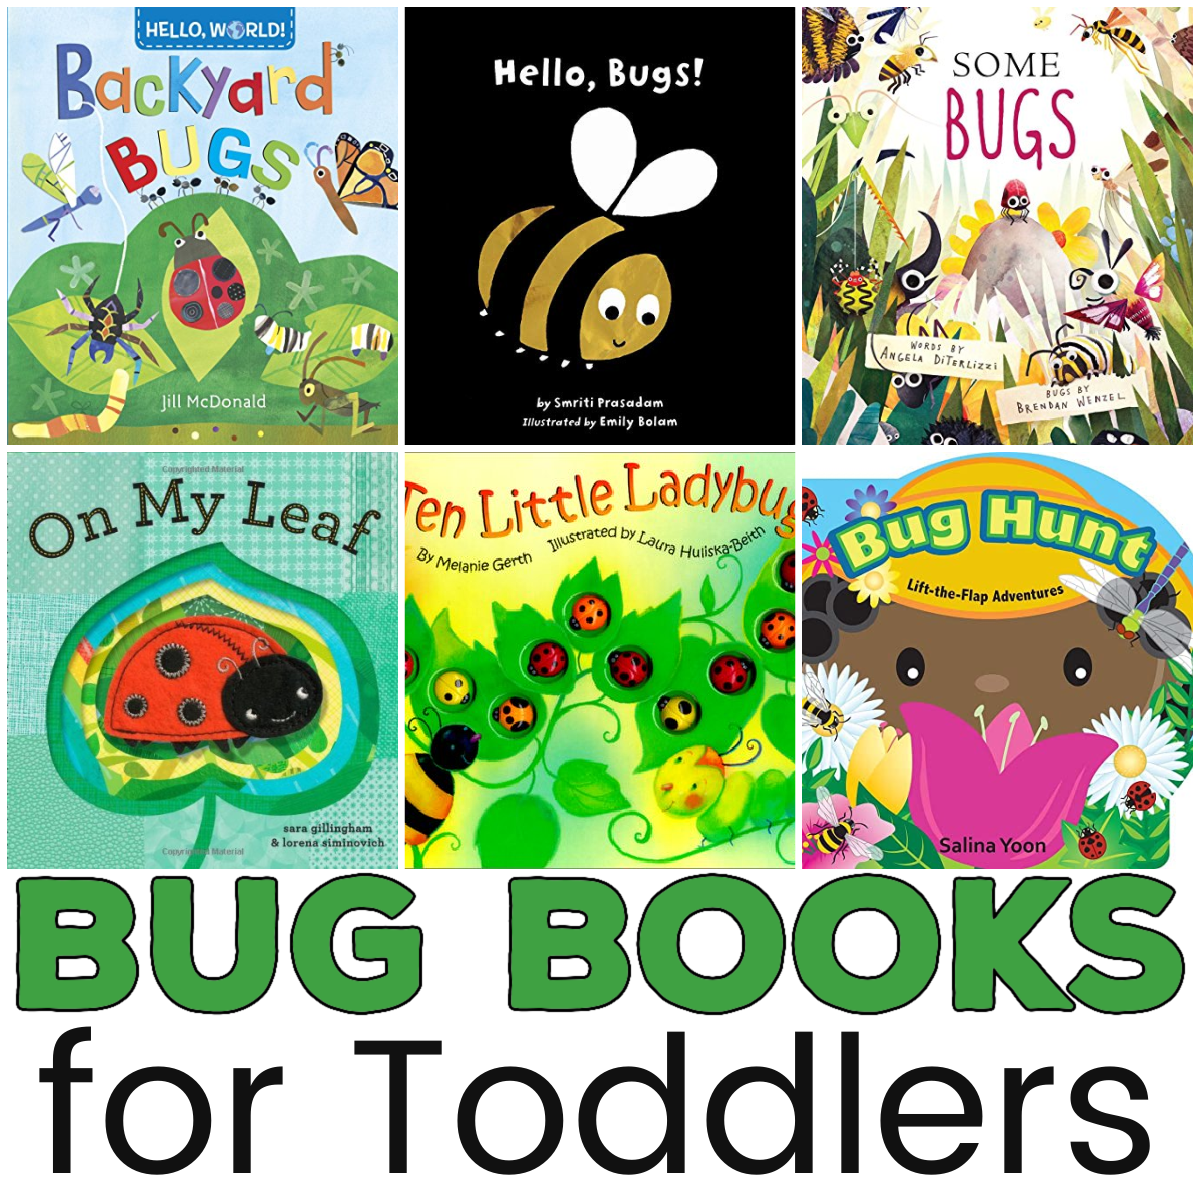 Books-About-Bugs-for-Toddlers-3 Books About Bugs for Toddlers